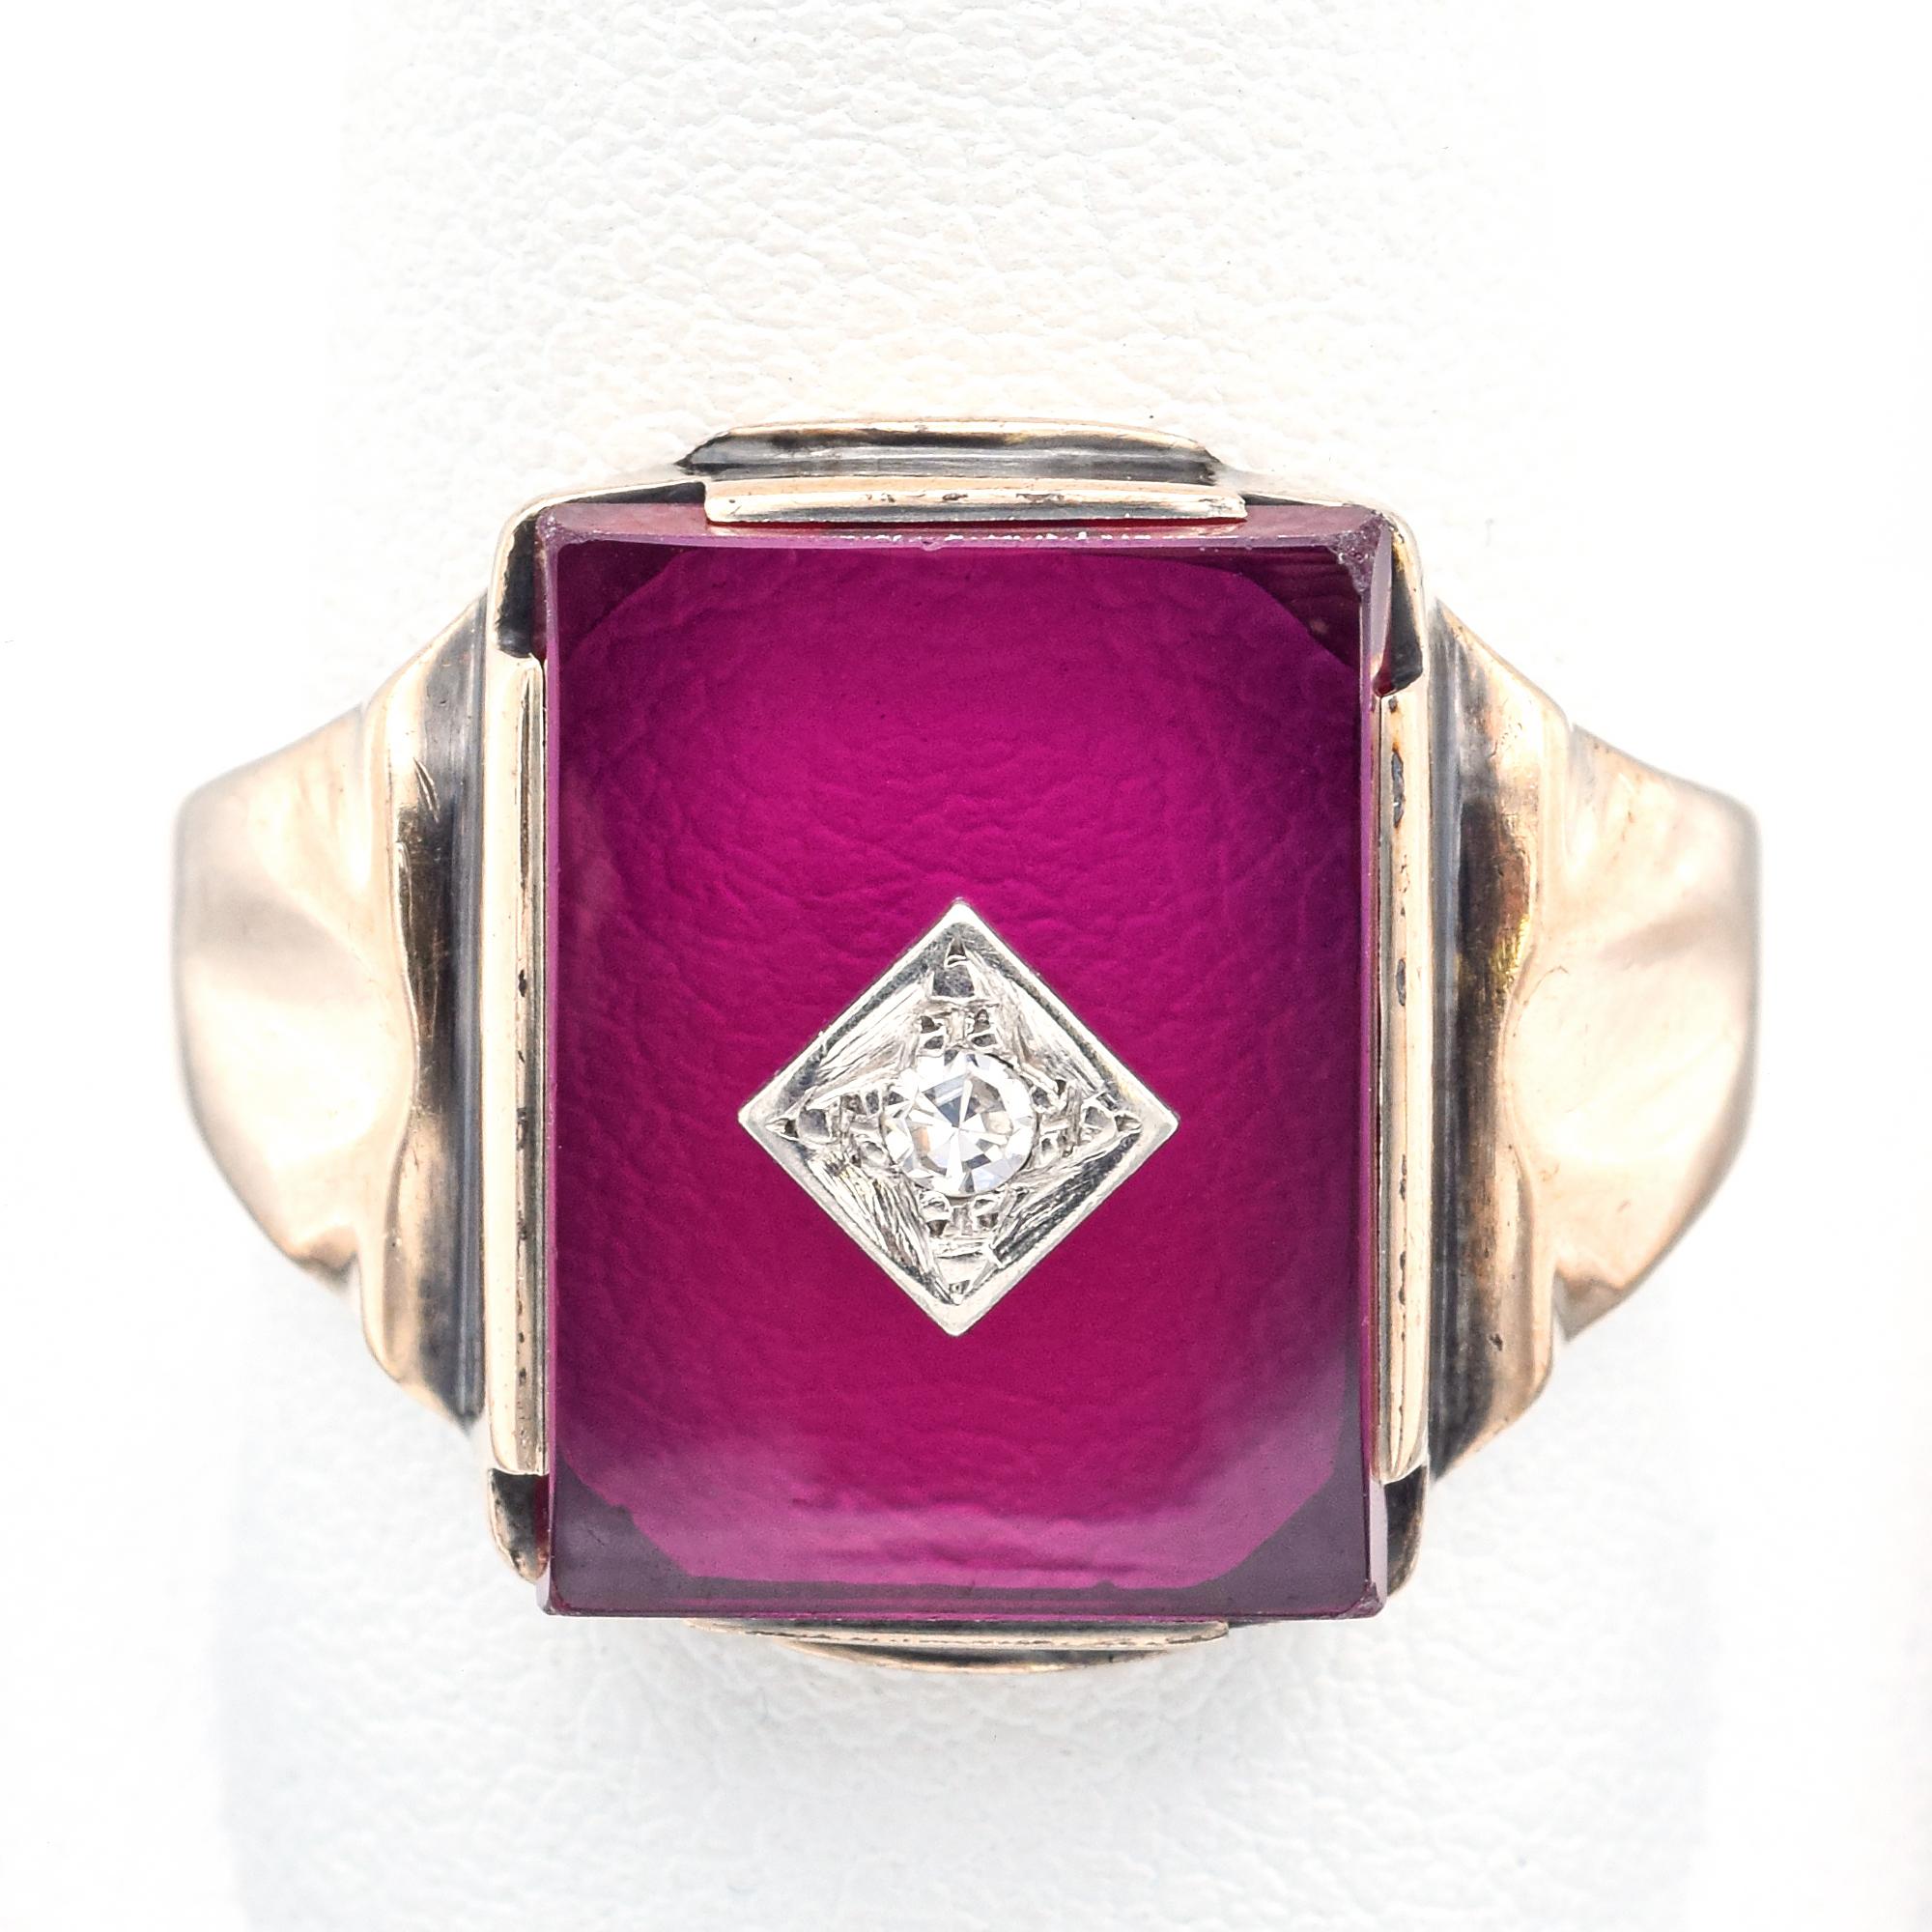 Weight: 6.9 Grams
Stone: Ruby (16 x 12 mm) & H SI1 Diamond (2.25 mm)
Face of Ring: 18 x 18 x 5 mm
Size: 10.75
Hallmark: 10K

ITEM #:BR-1062-092823-18